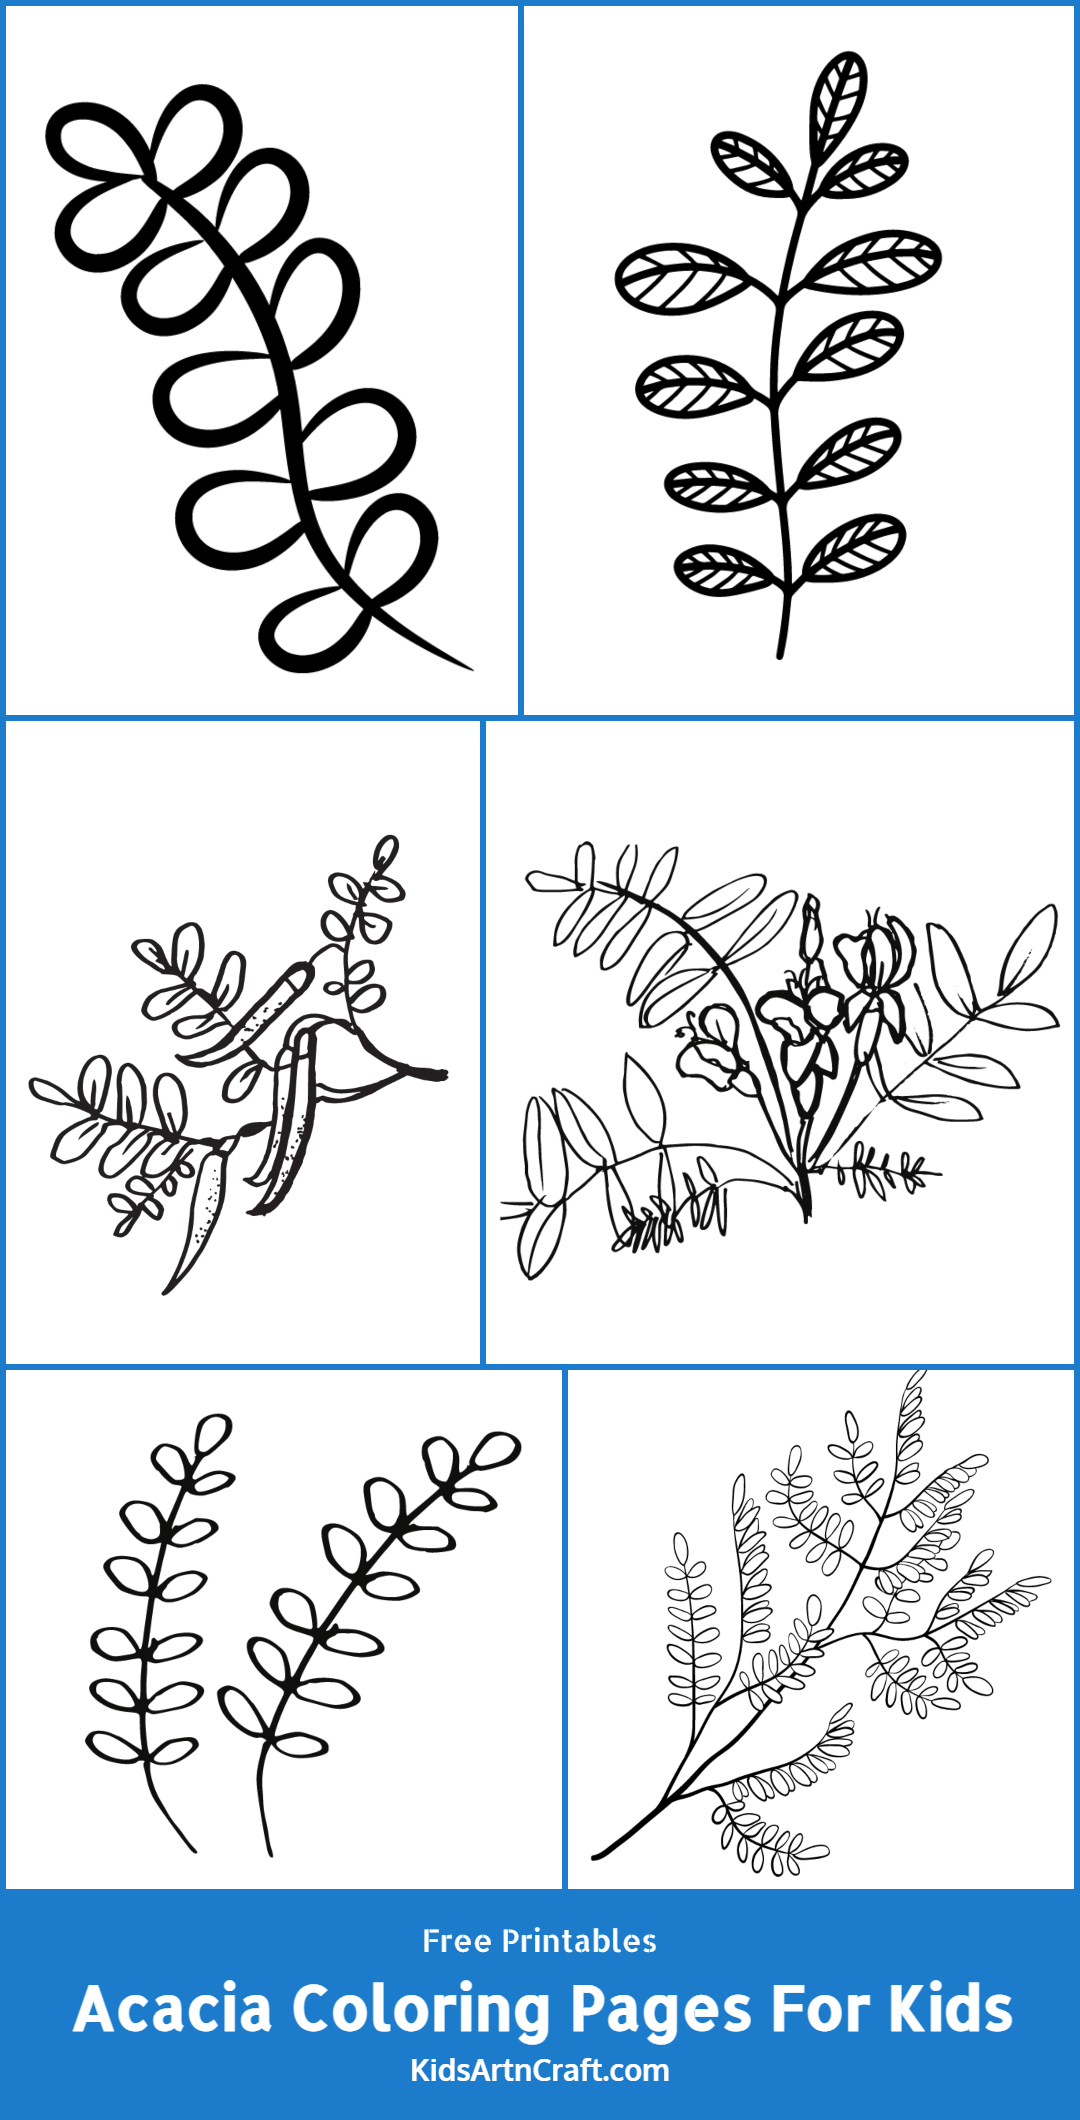 Acacia Coloring Pages For Kids – Free Printables